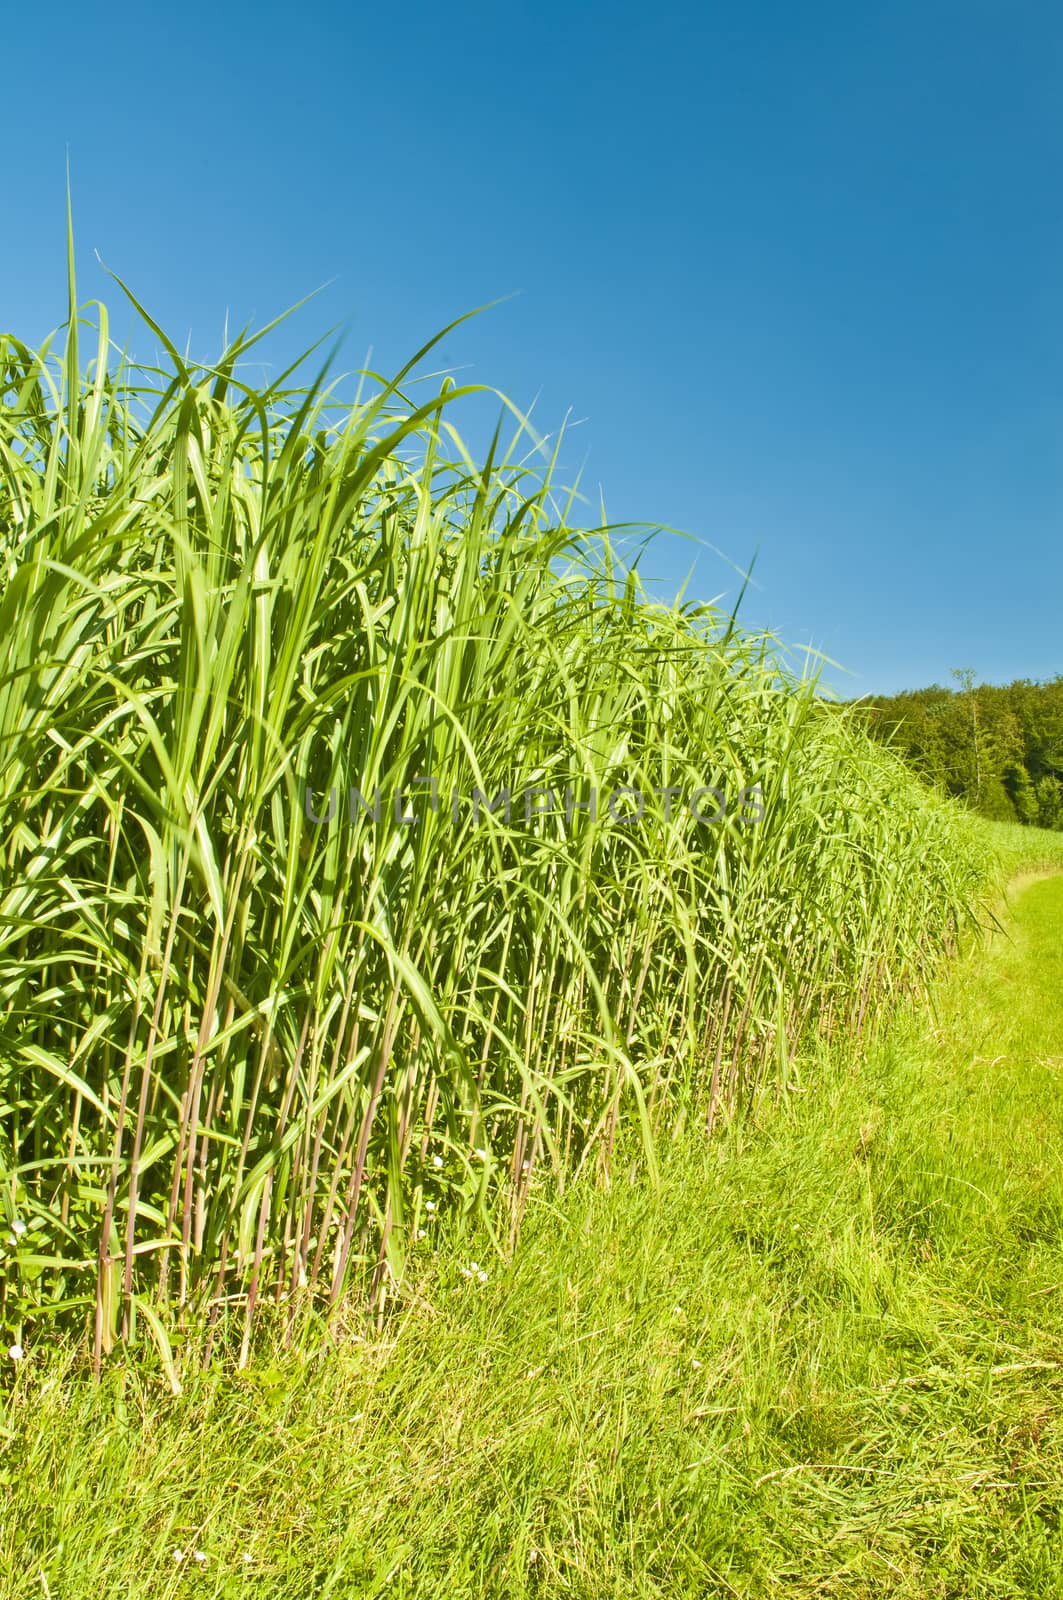 The renewable resource switch grass for heating and production of diesel